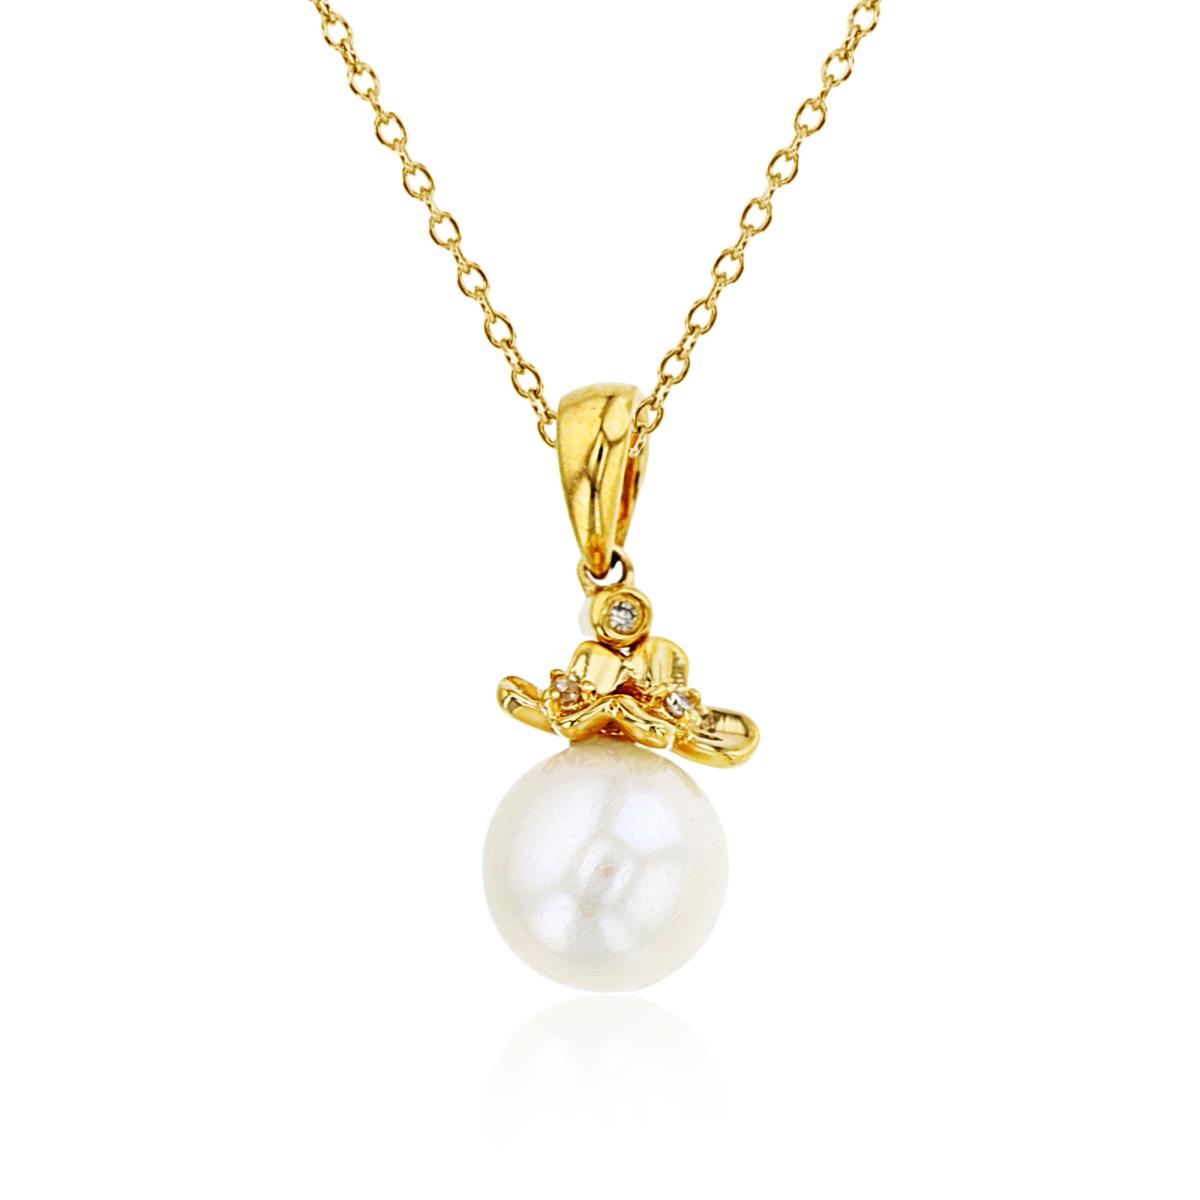 14K Yellow Gold 0.02 CTTW Rnd Diamonds & 7mm White Pearl 18"Necklace